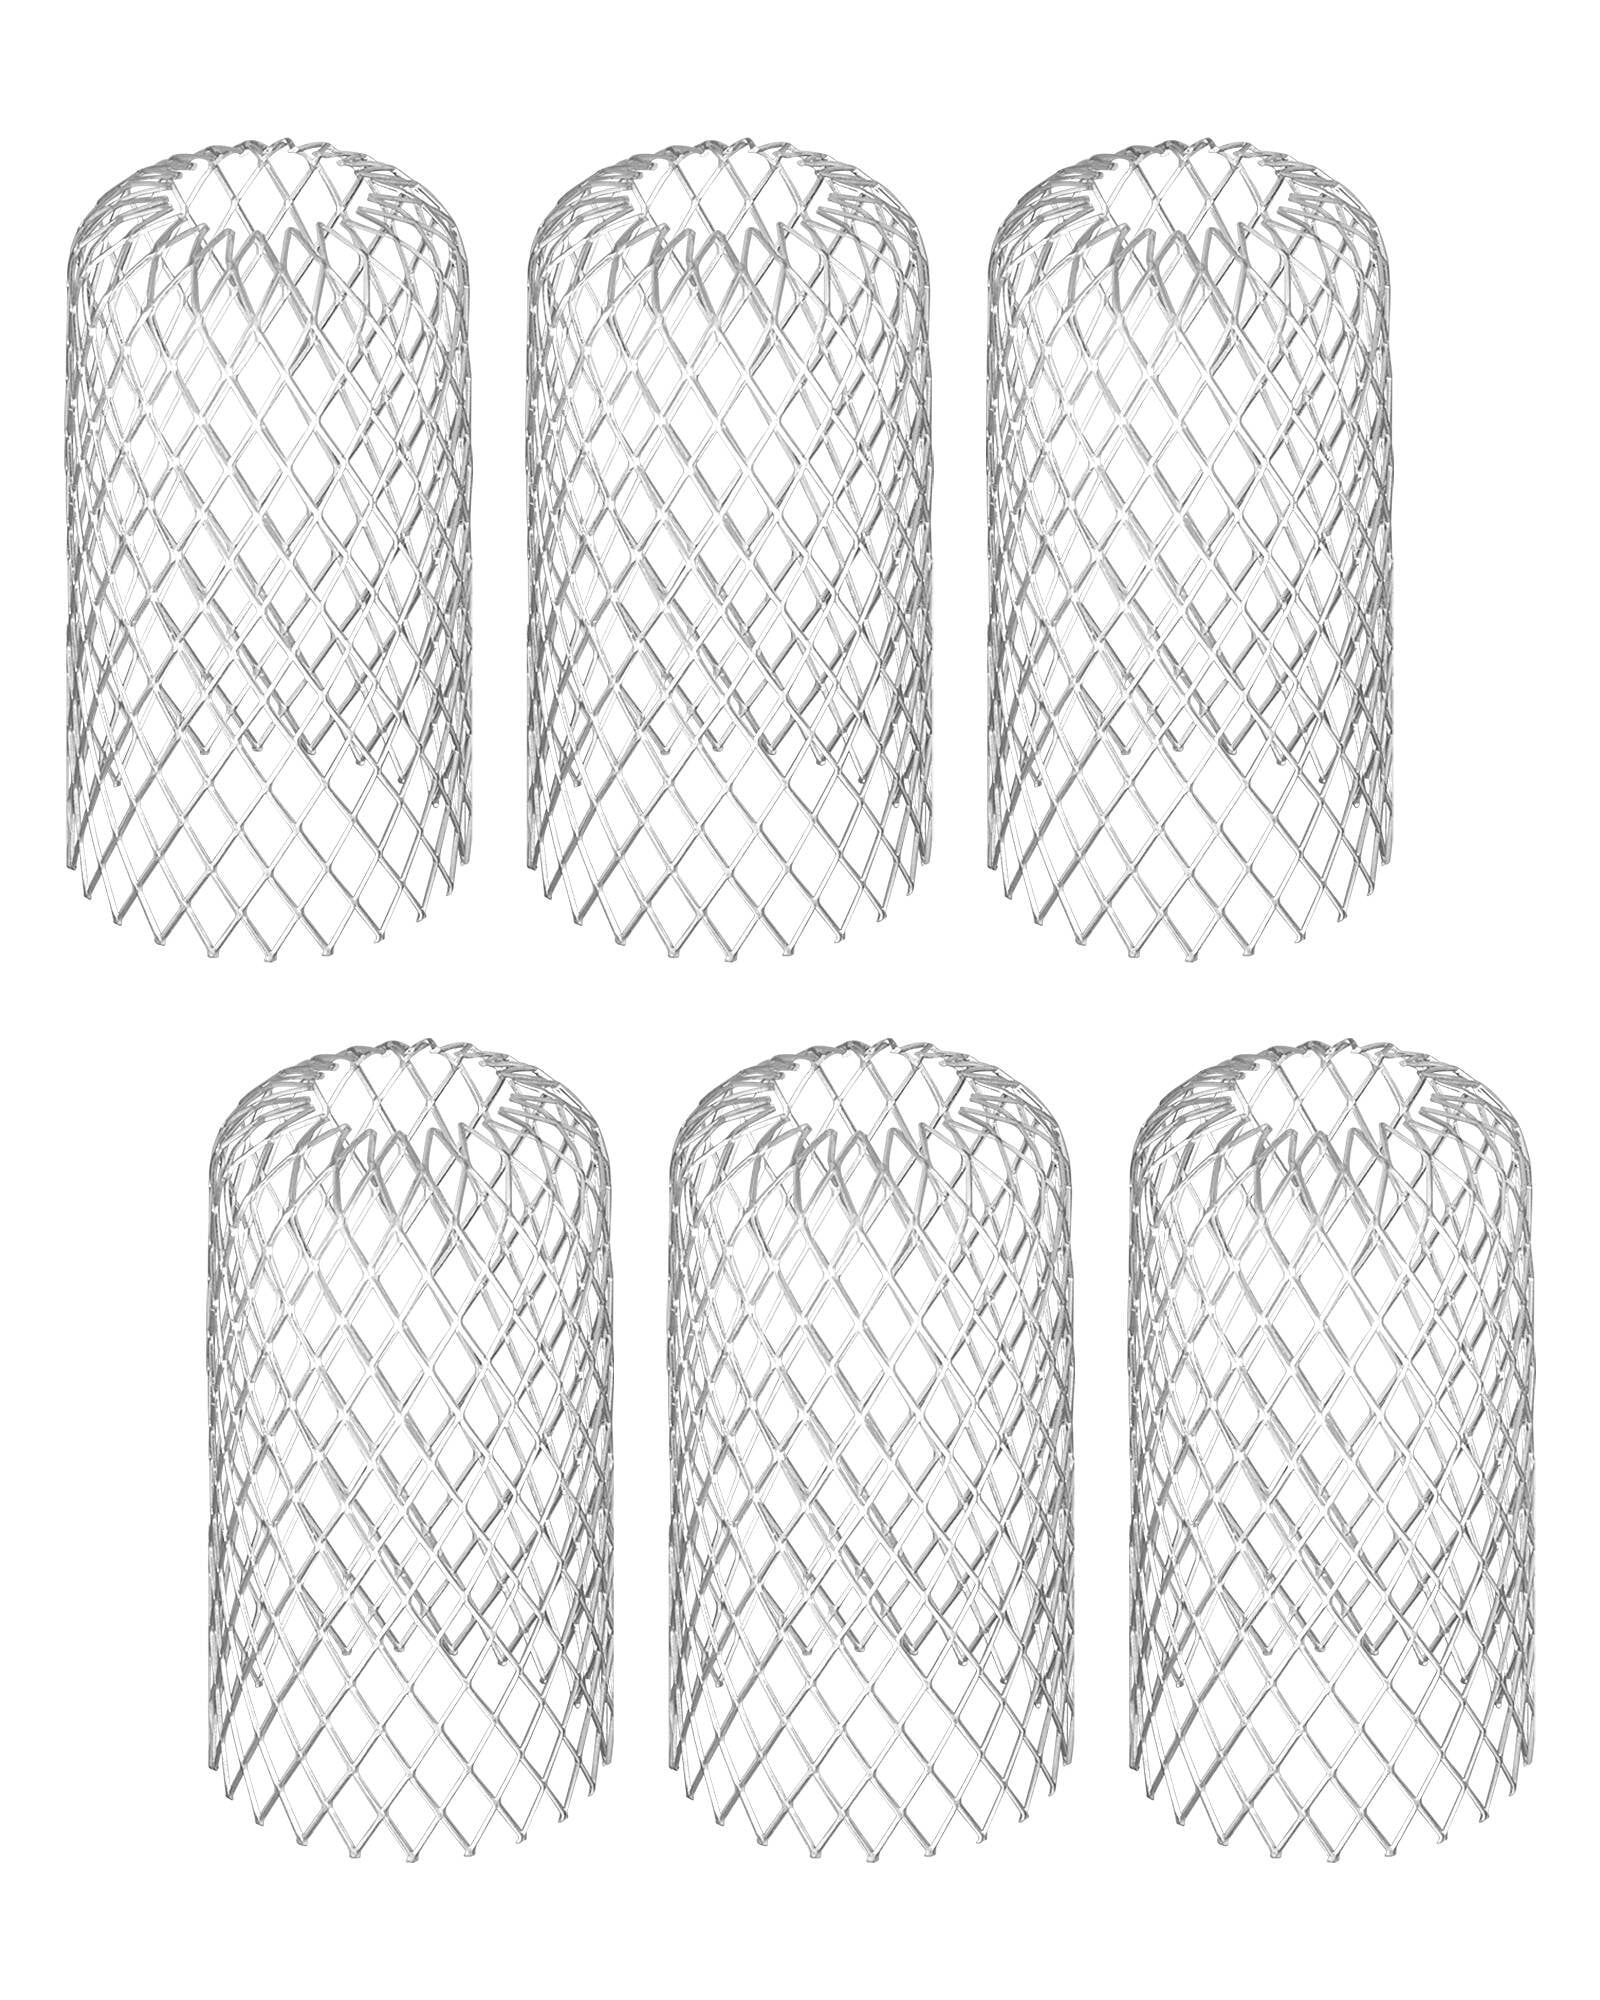 6 Downpipe Leaf Guard Set Leaves Rain Gutter Protection Gutter Protection Screen 